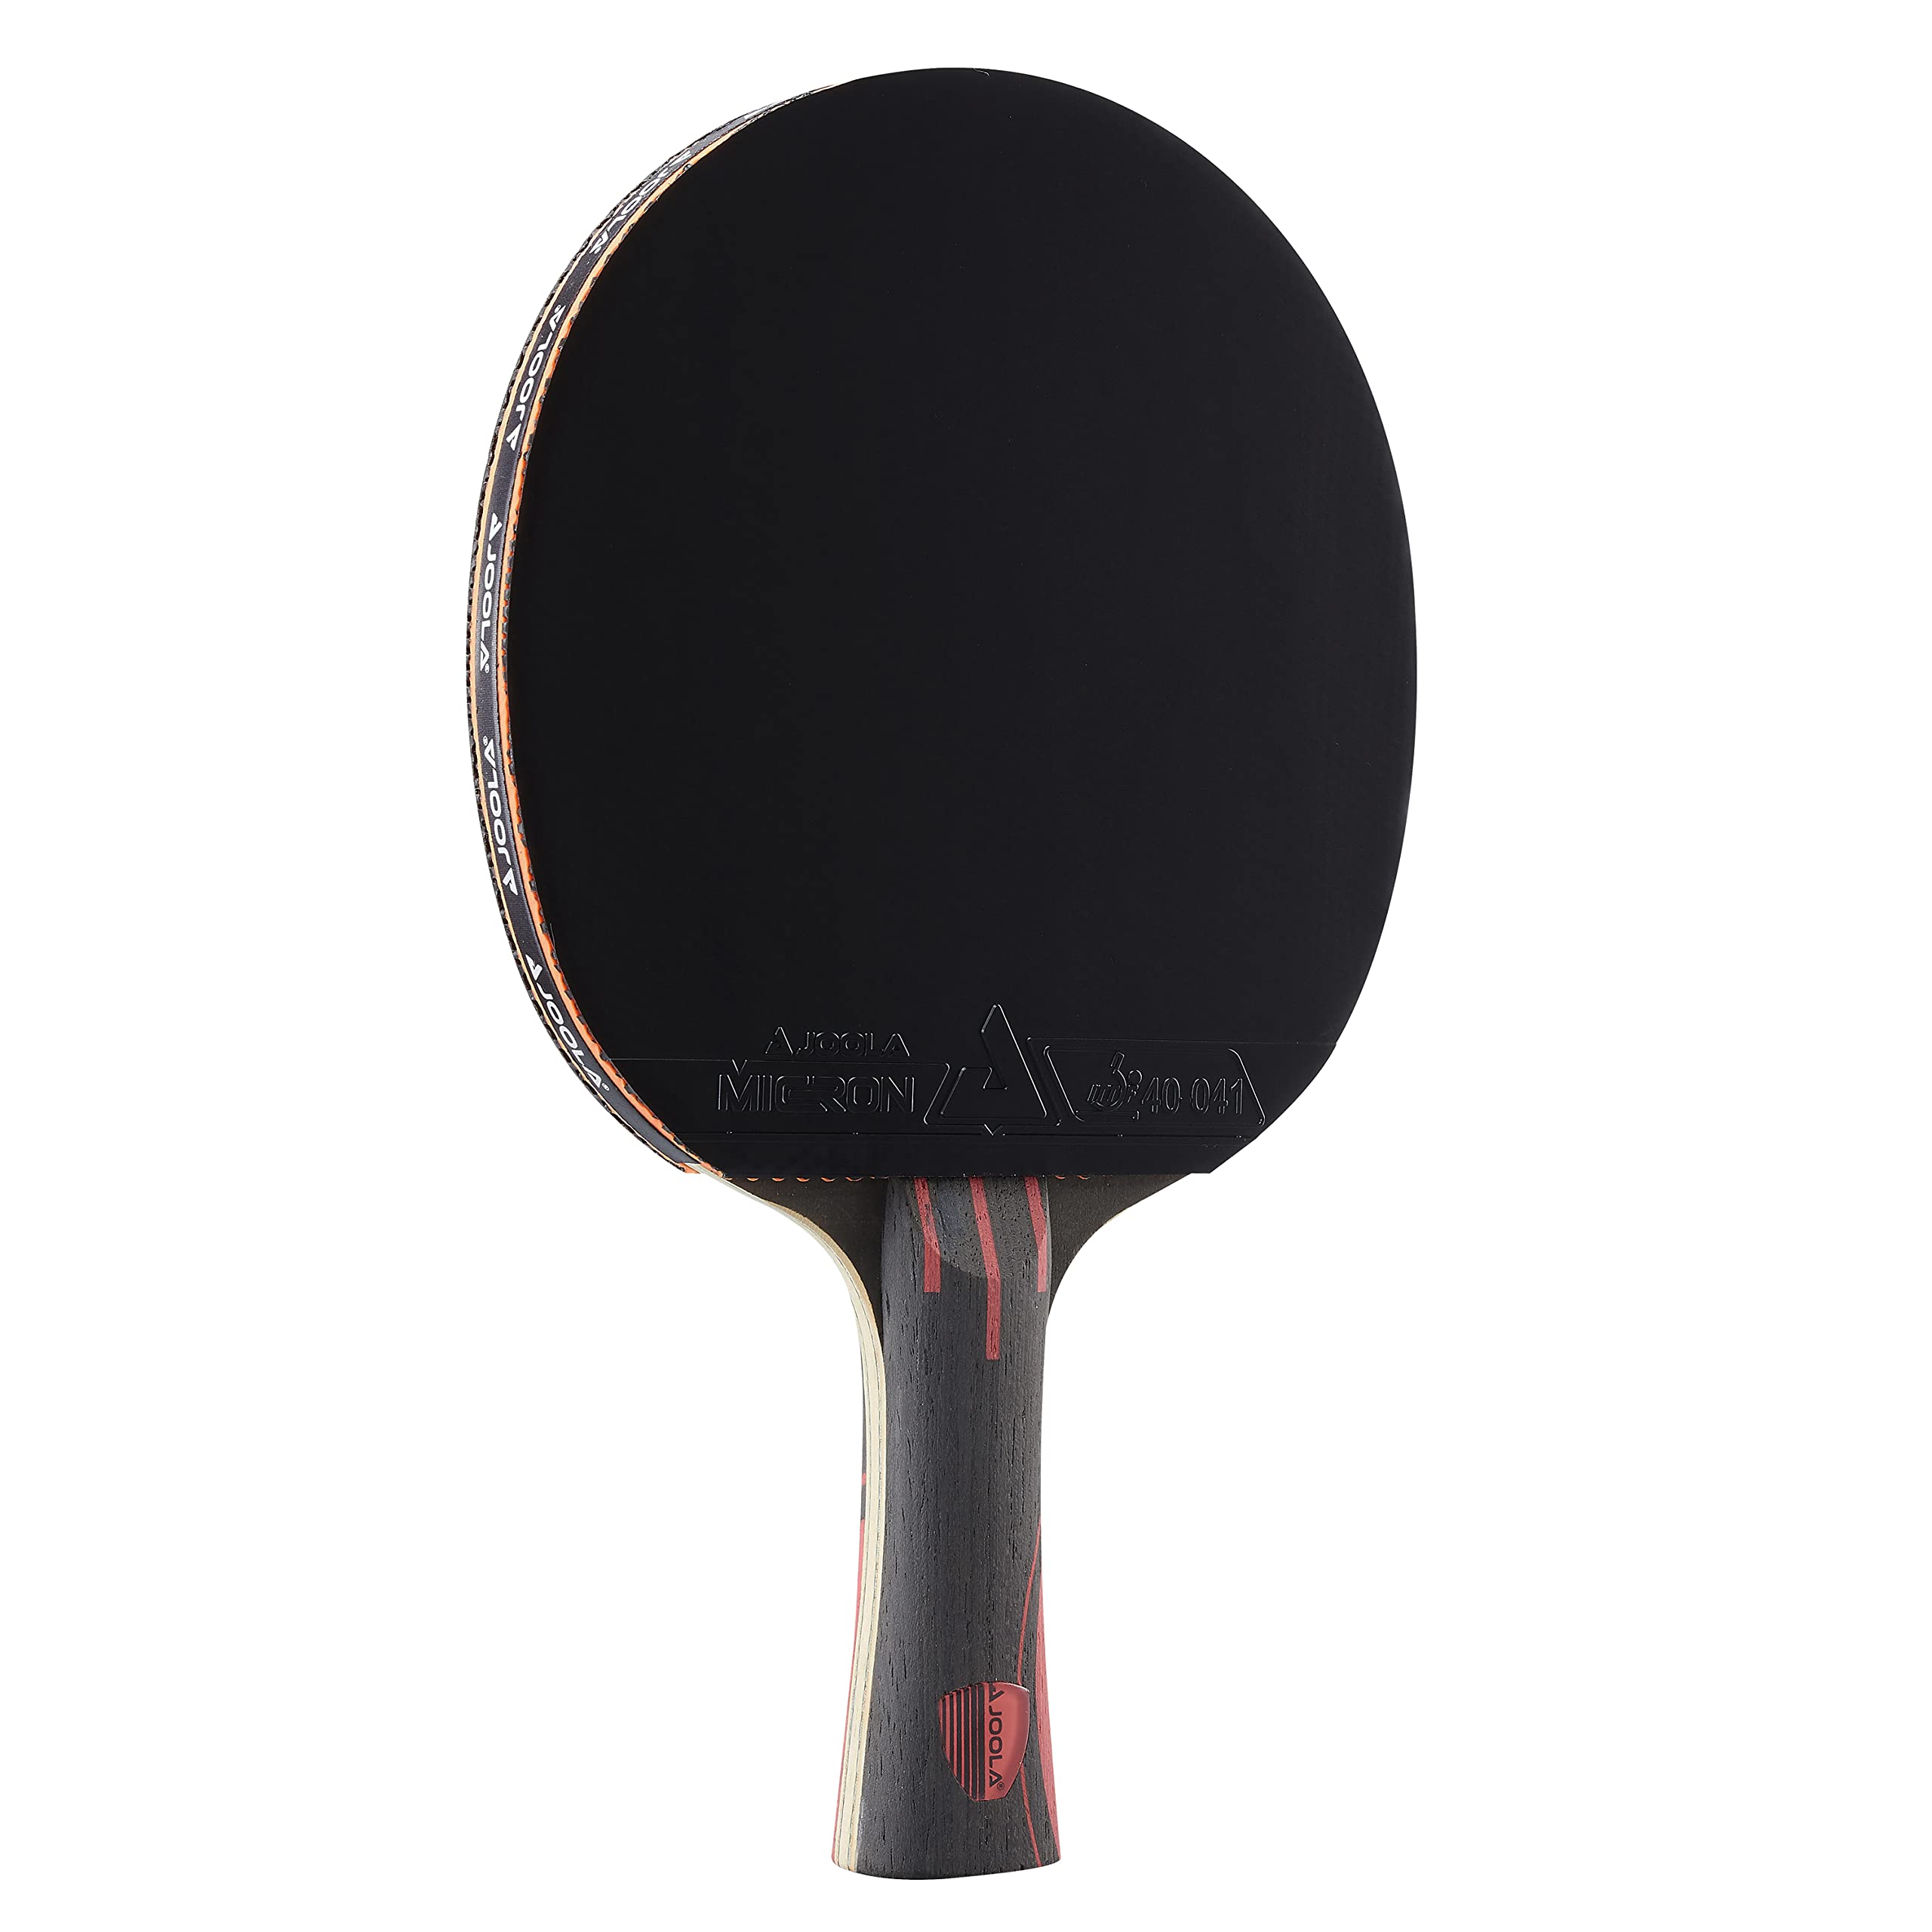 JOOLA Infinity Overdrive - Professional Performance Ping Pong Paddle with carbon Kevlar Technology - Black Rubber on Both Sides 